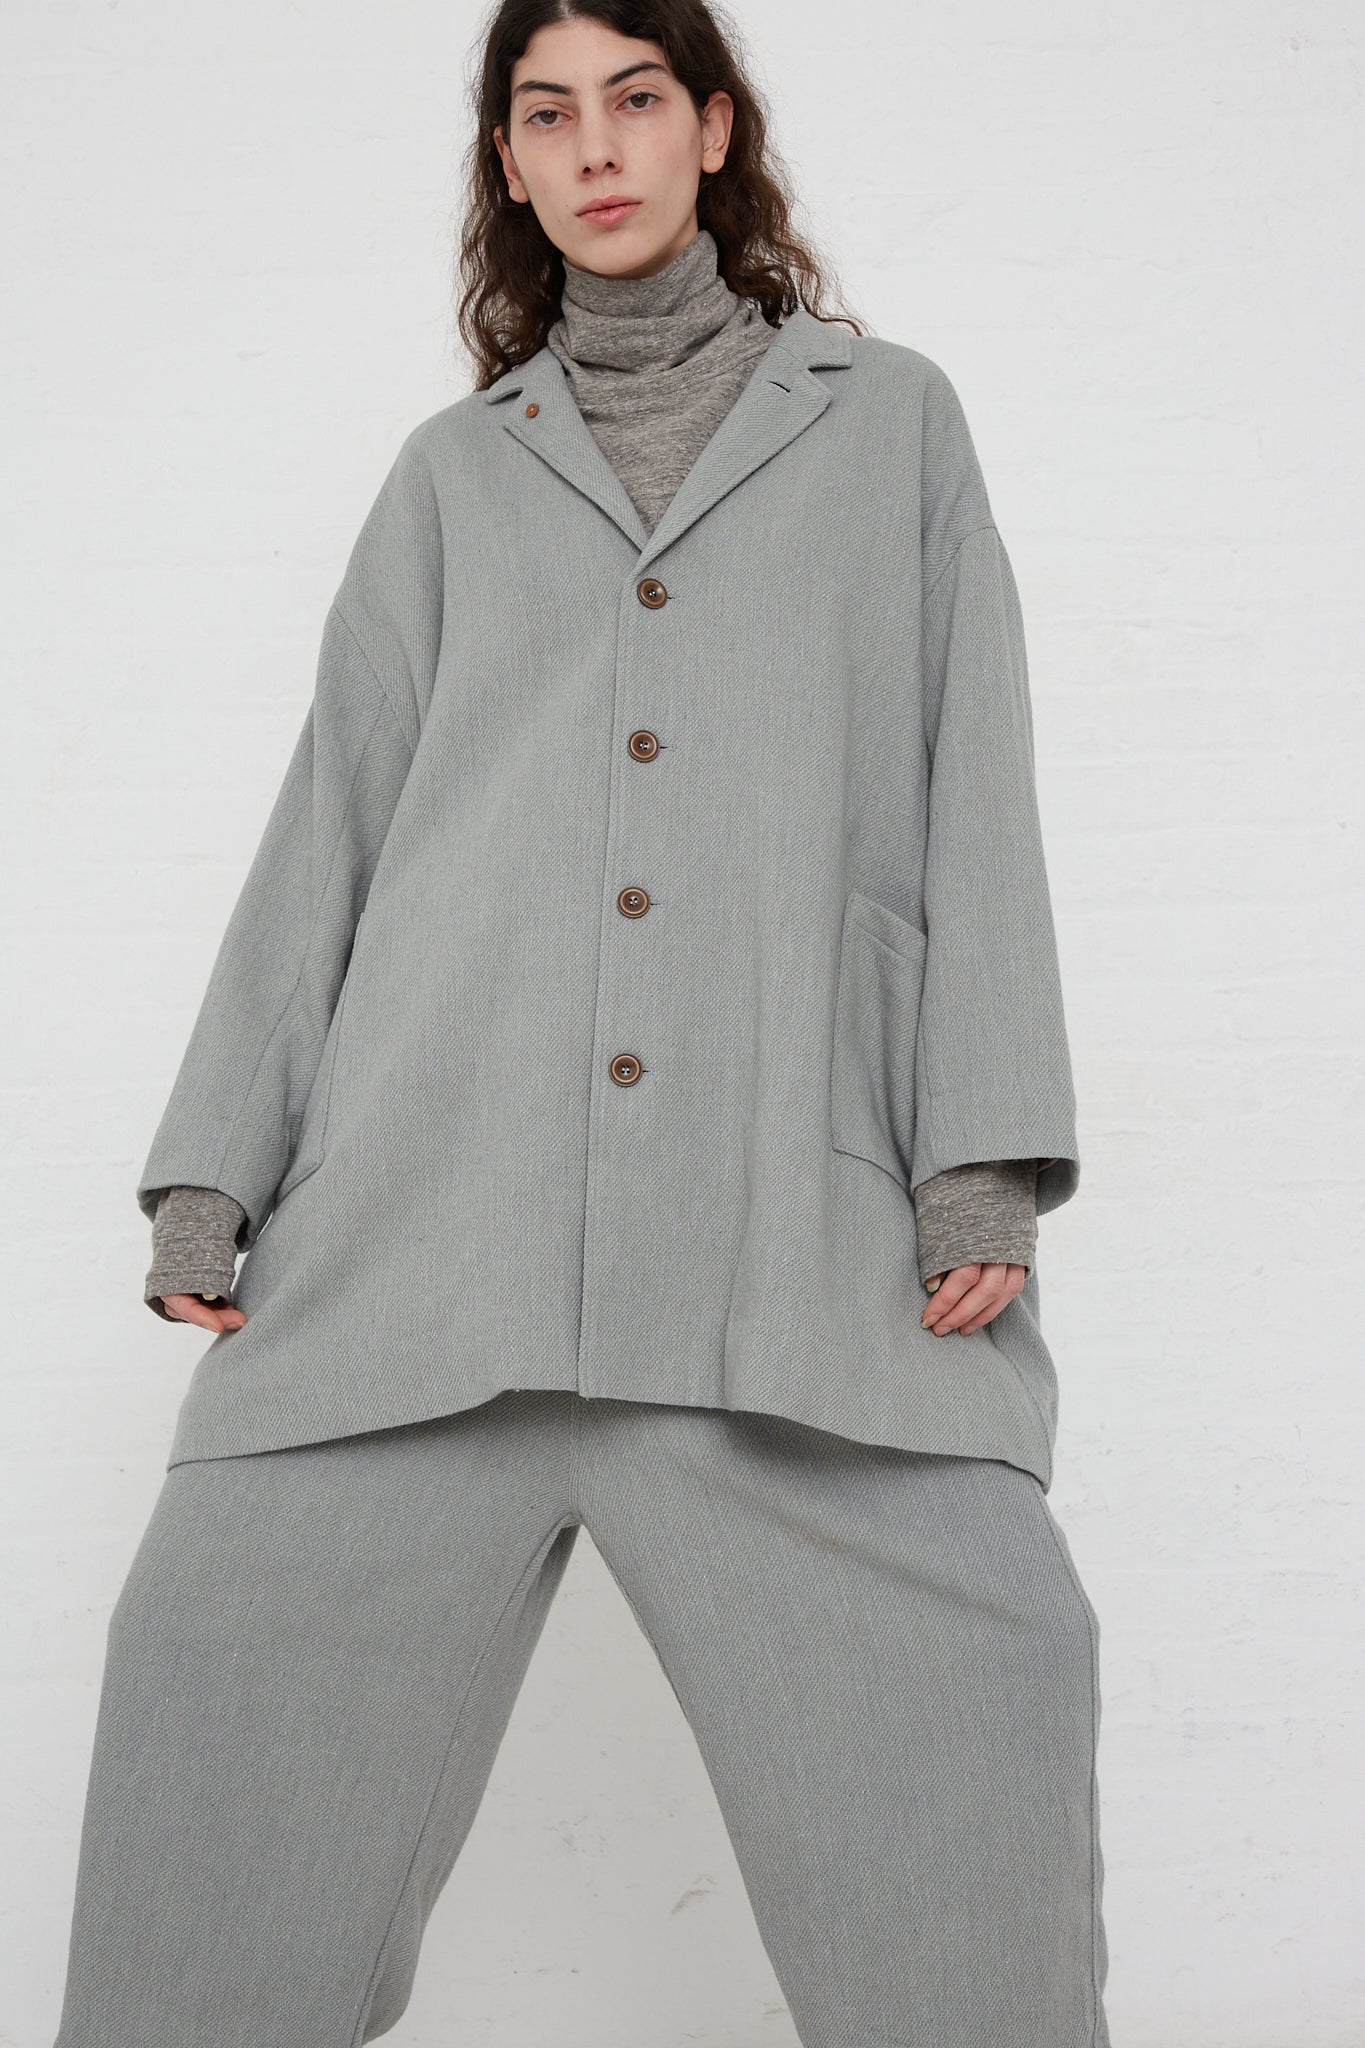 The model is wearing an oversized Merino Wool Orihimedaki Jacket in Blue by Ichi Antiquités with patch pockets.